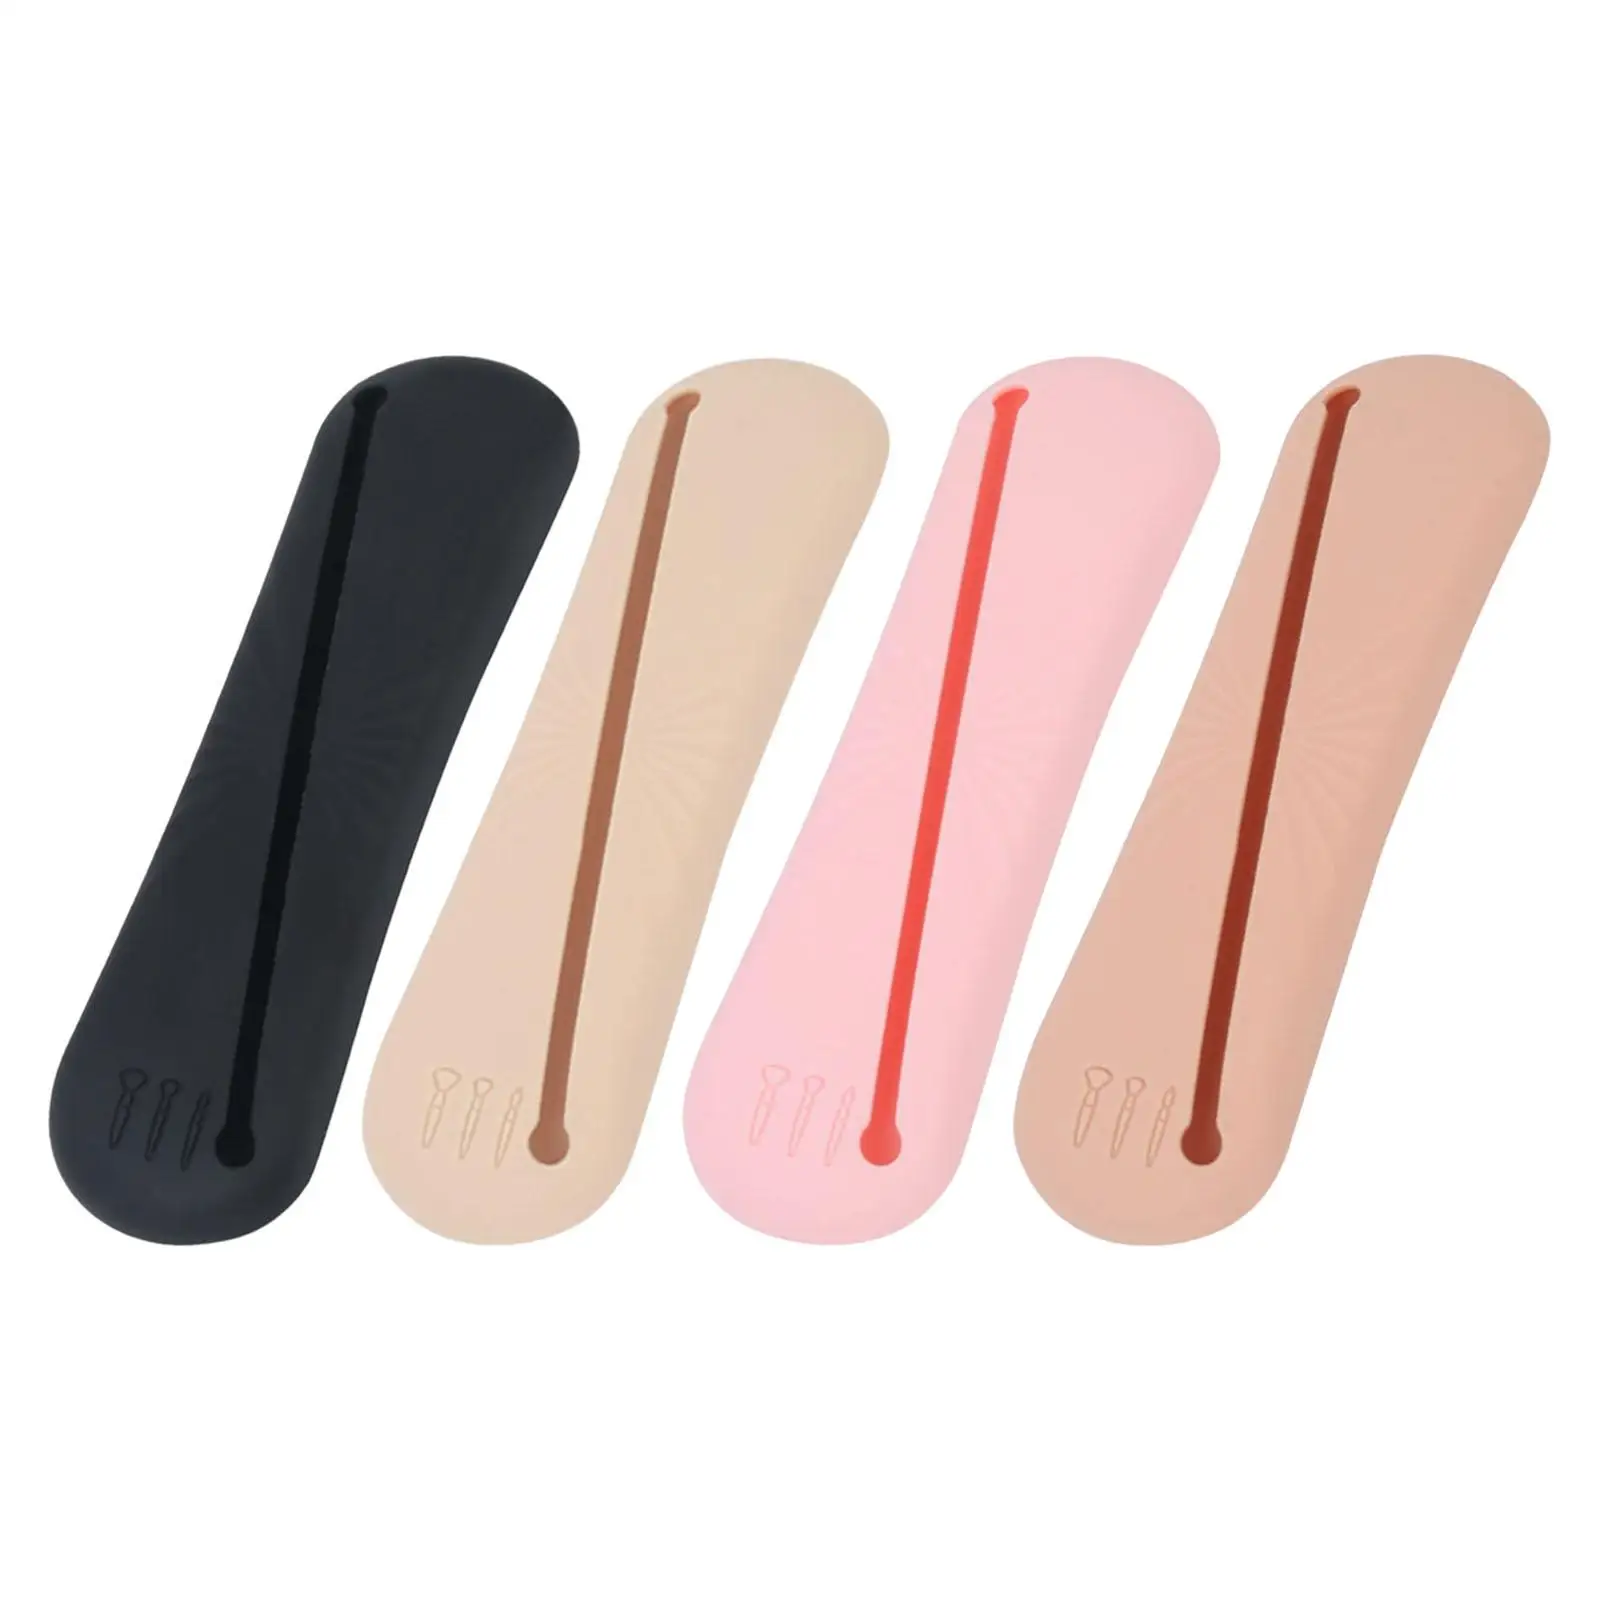 Makeup Brush Organizer Bag Cosmetics Holders Silicone Travel Brushes Case Bag Cup Makeup Brush Holder for Professional Artist